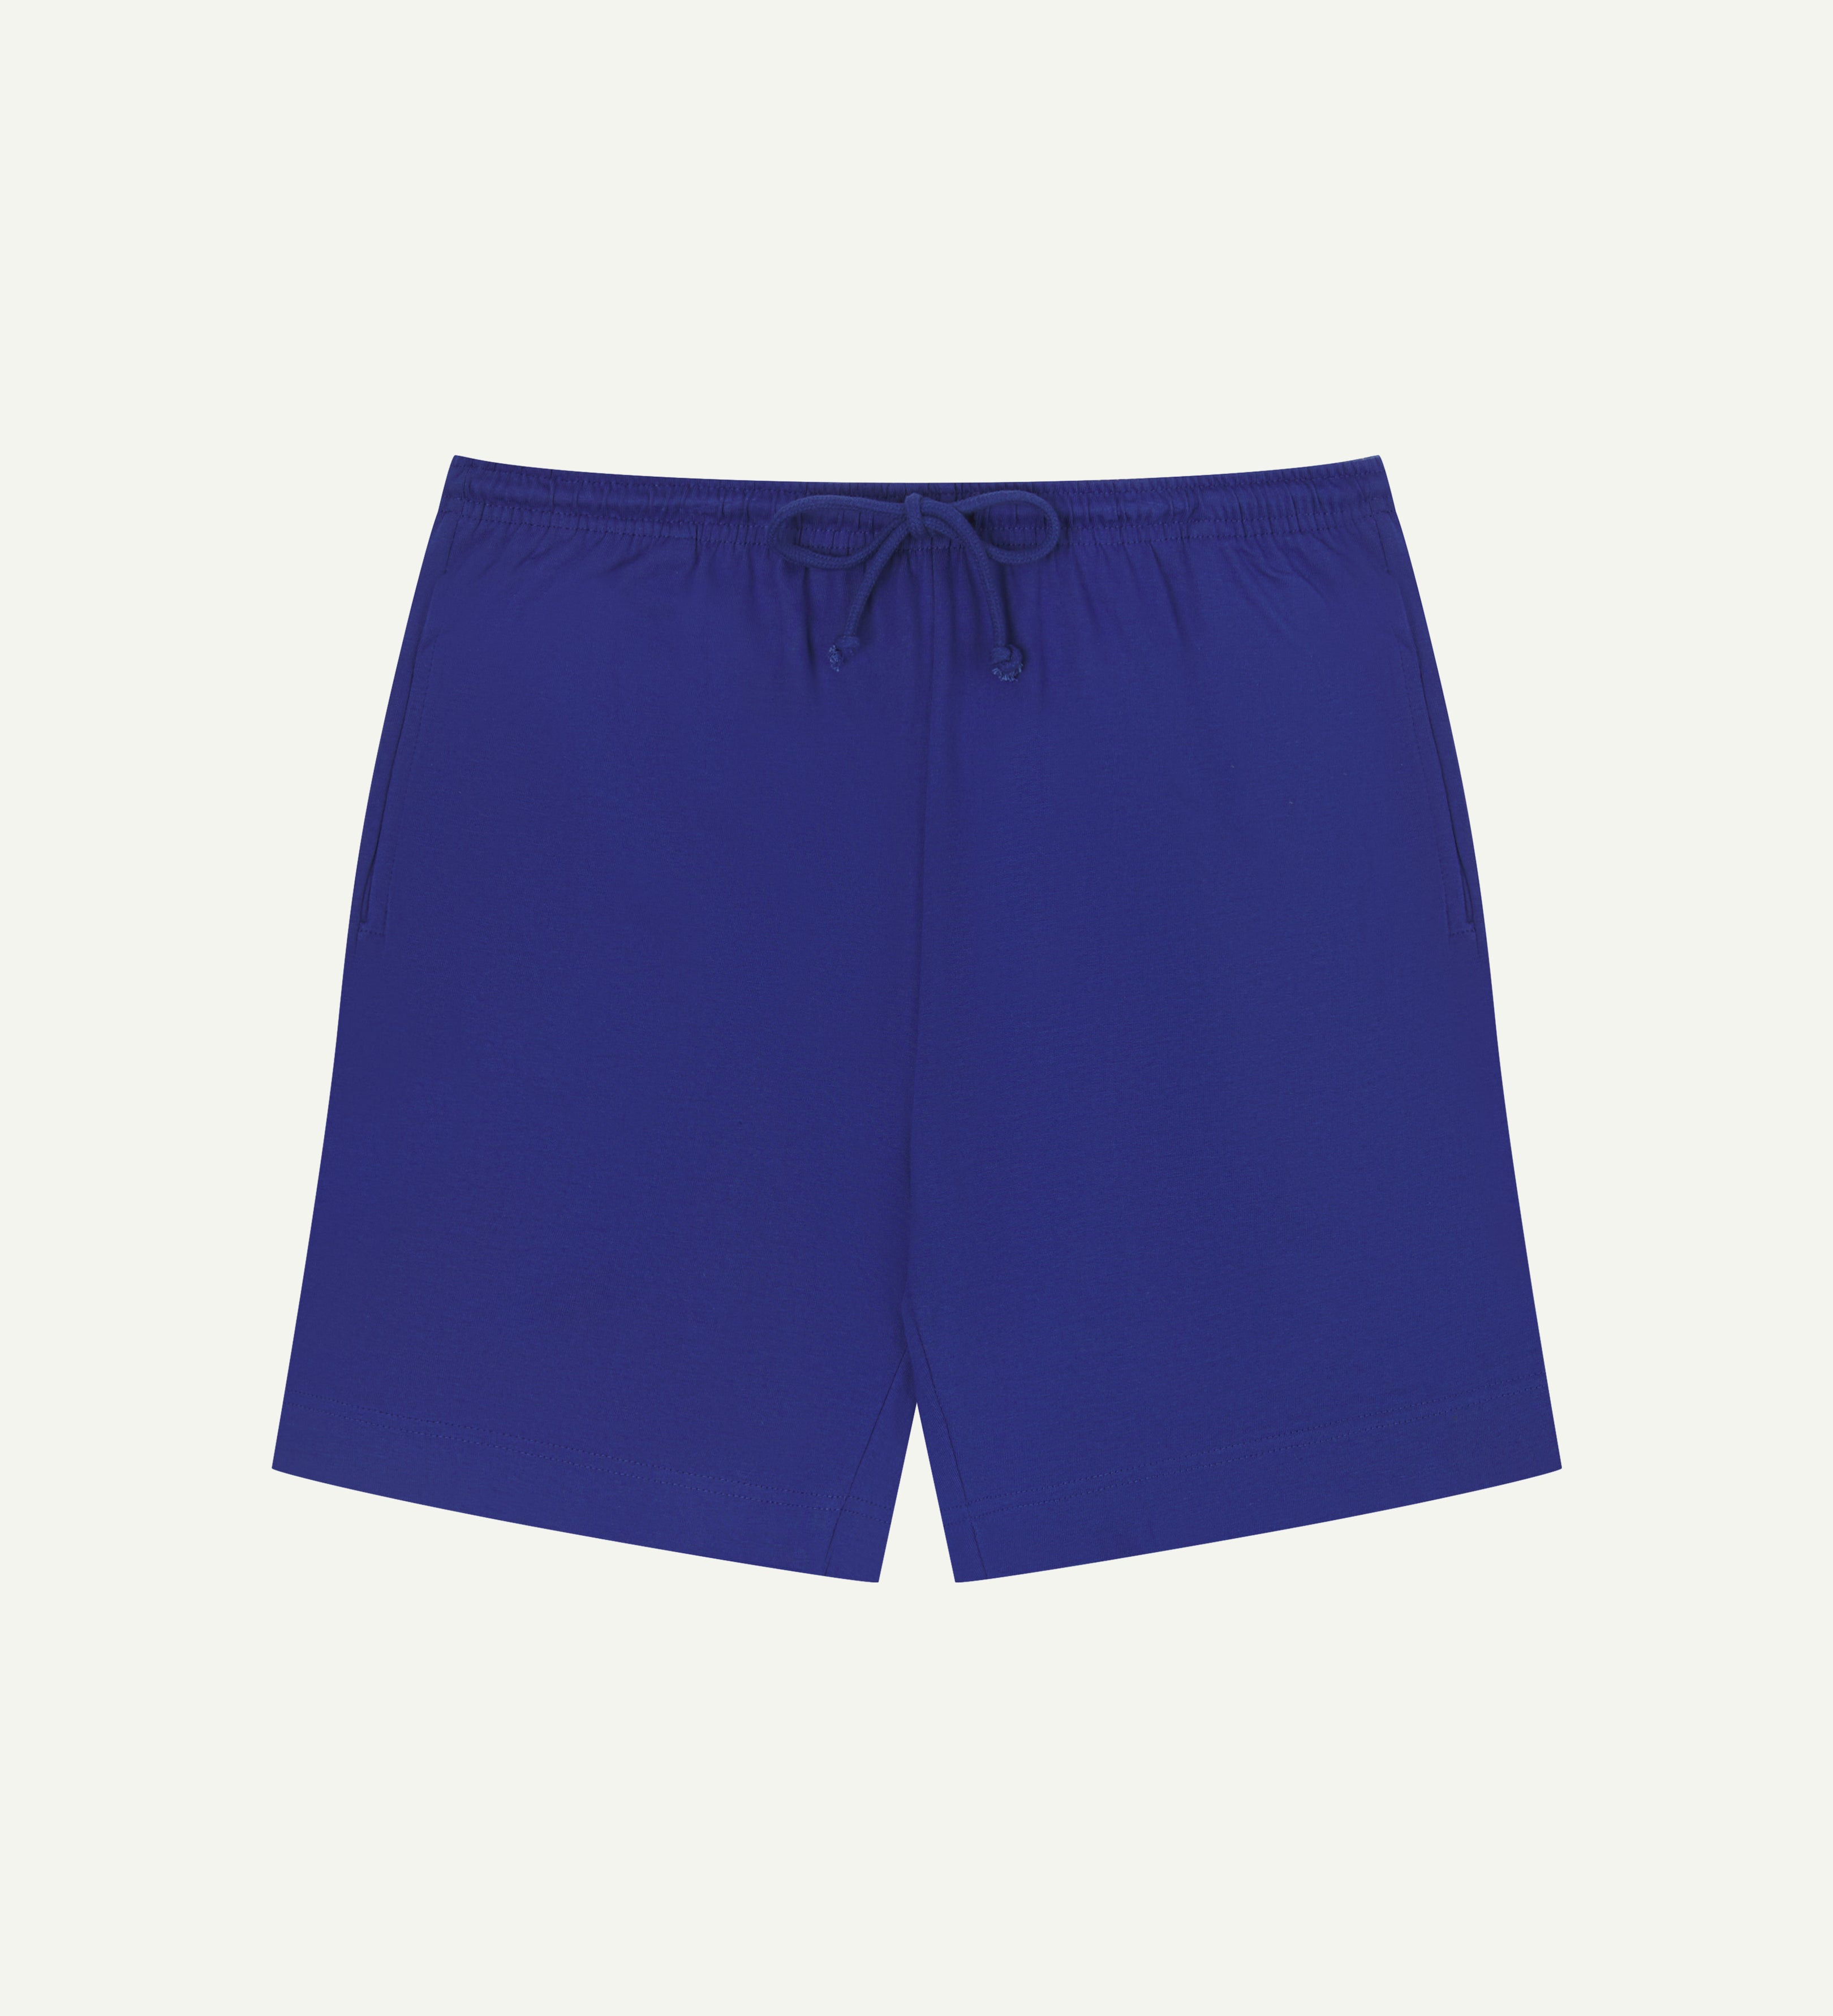 Front view of bright blue organic cotton #7007 men's shorts by Uskees against white background. Clear view of drawstring waist.